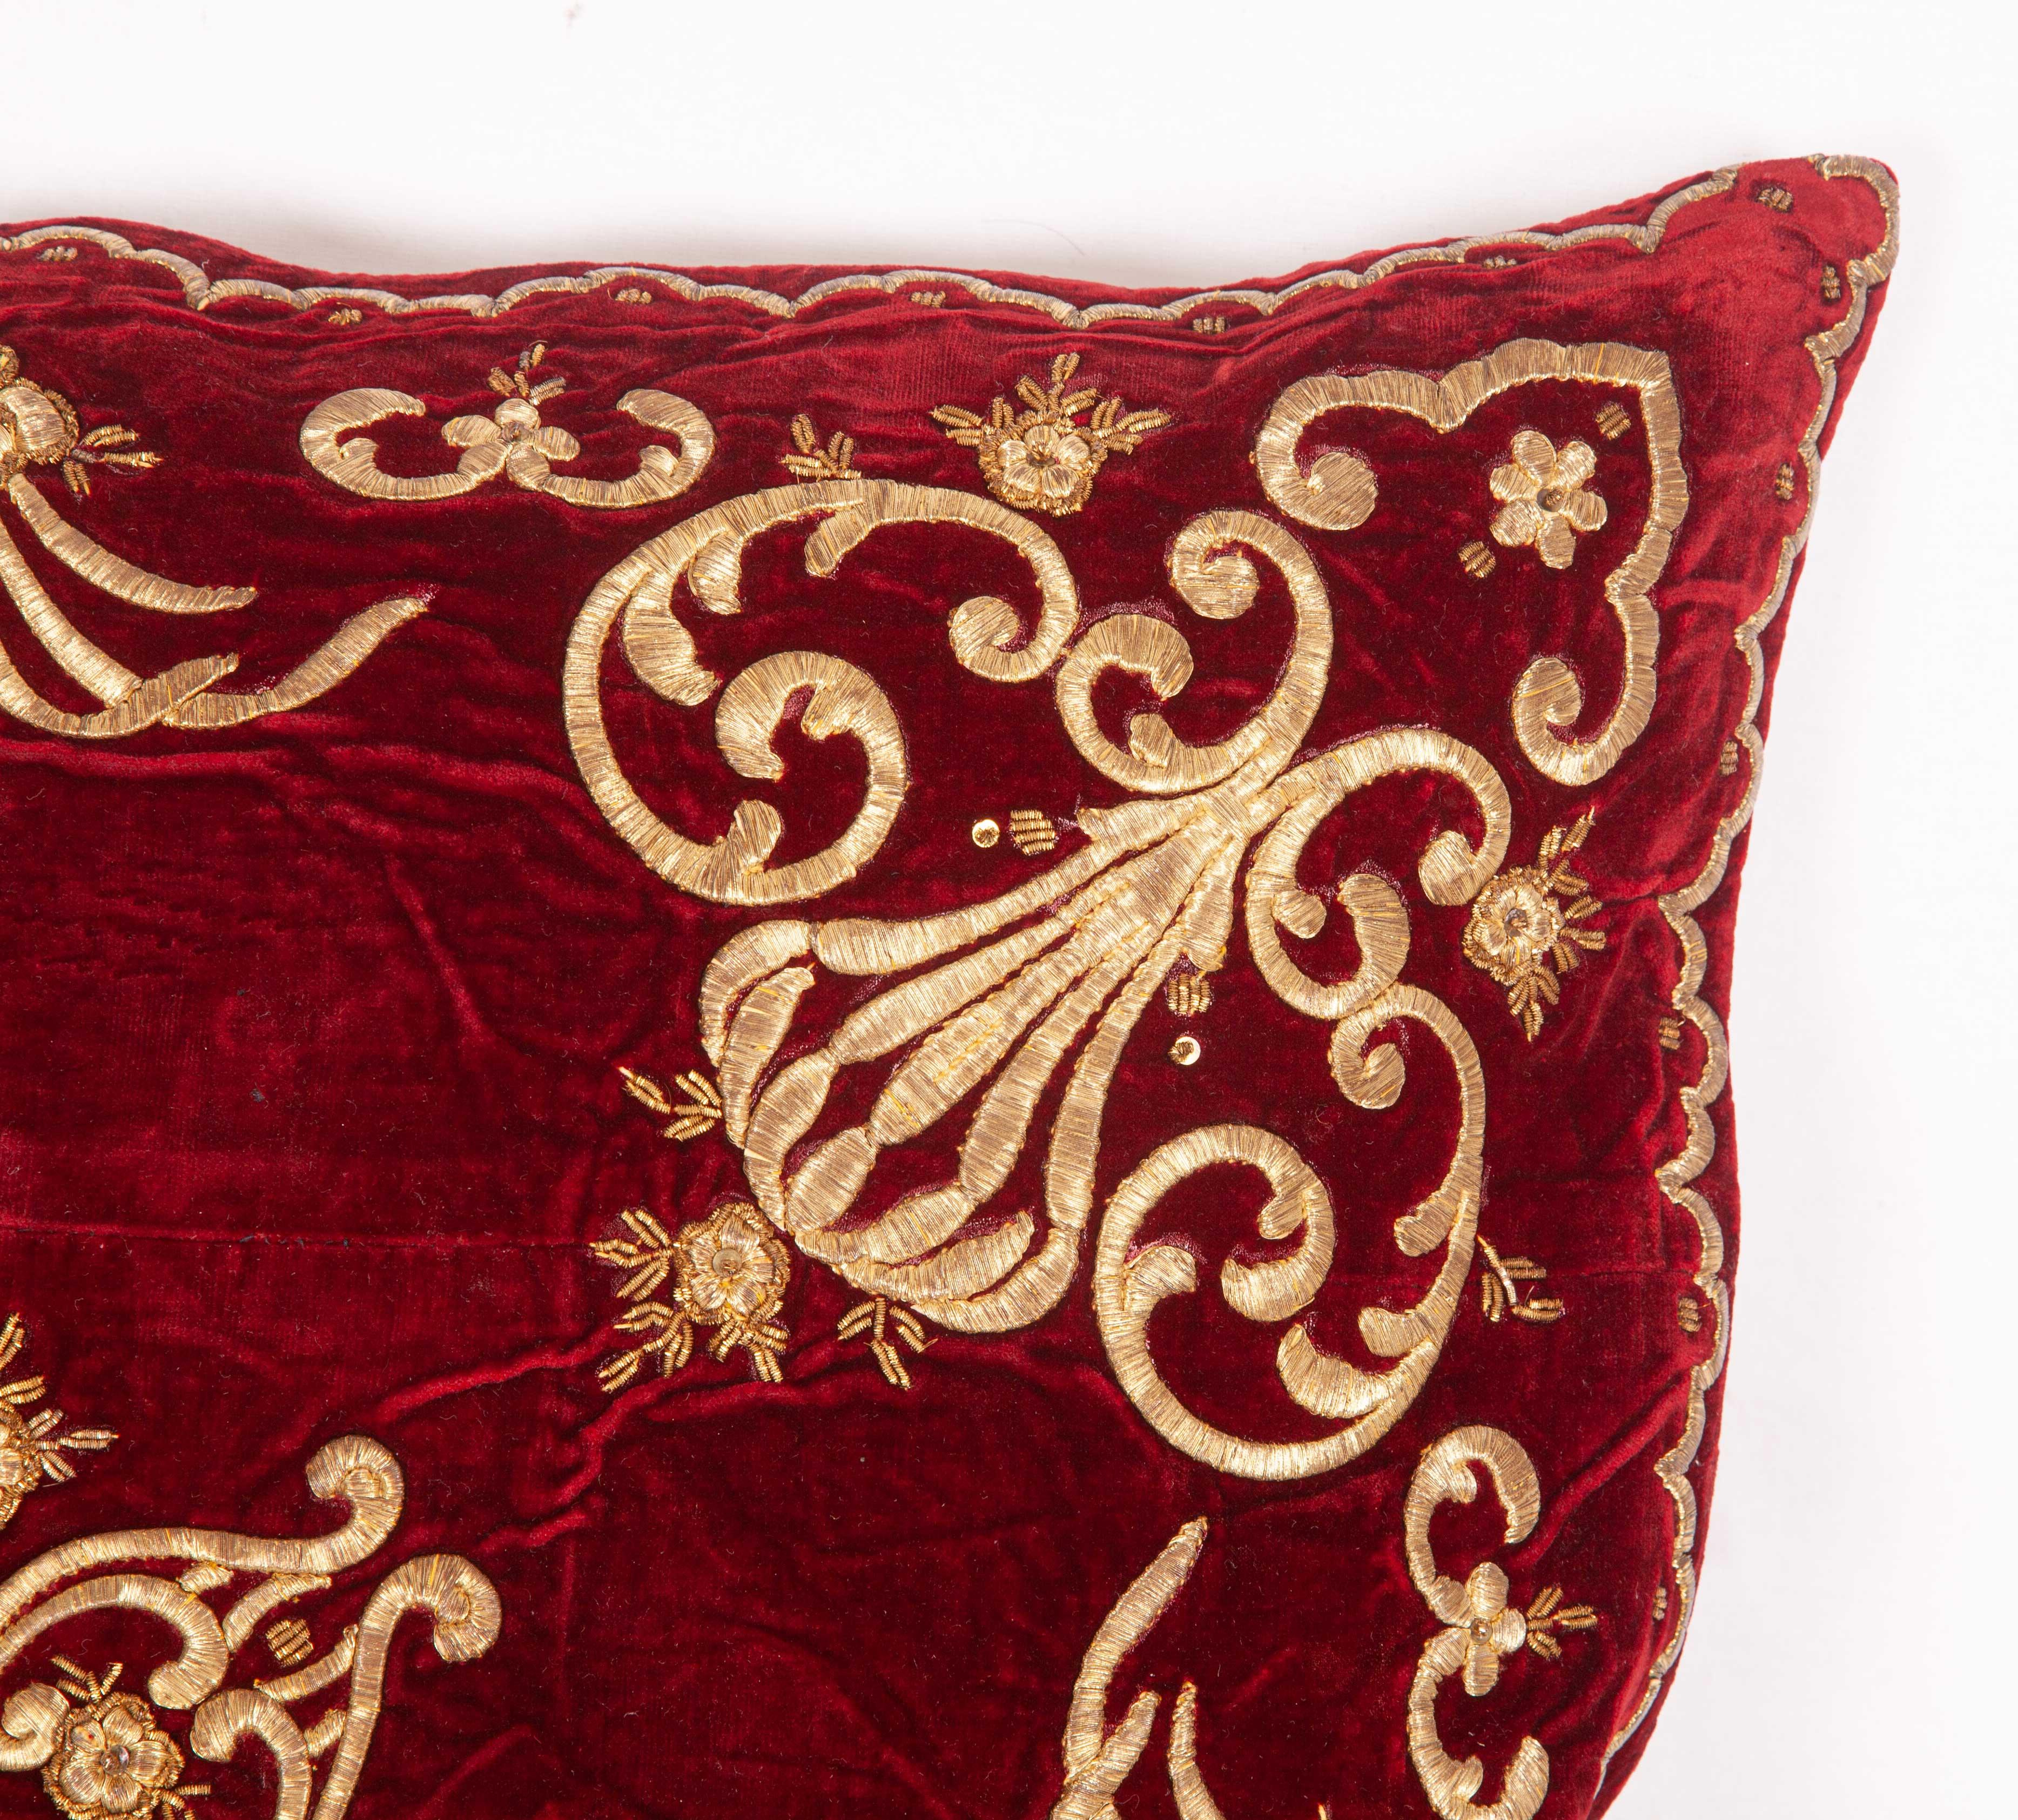 Embroidered Antique Ottoman Sarma Silk Velvet Pillow Case, Late 19th-Early 20th Century